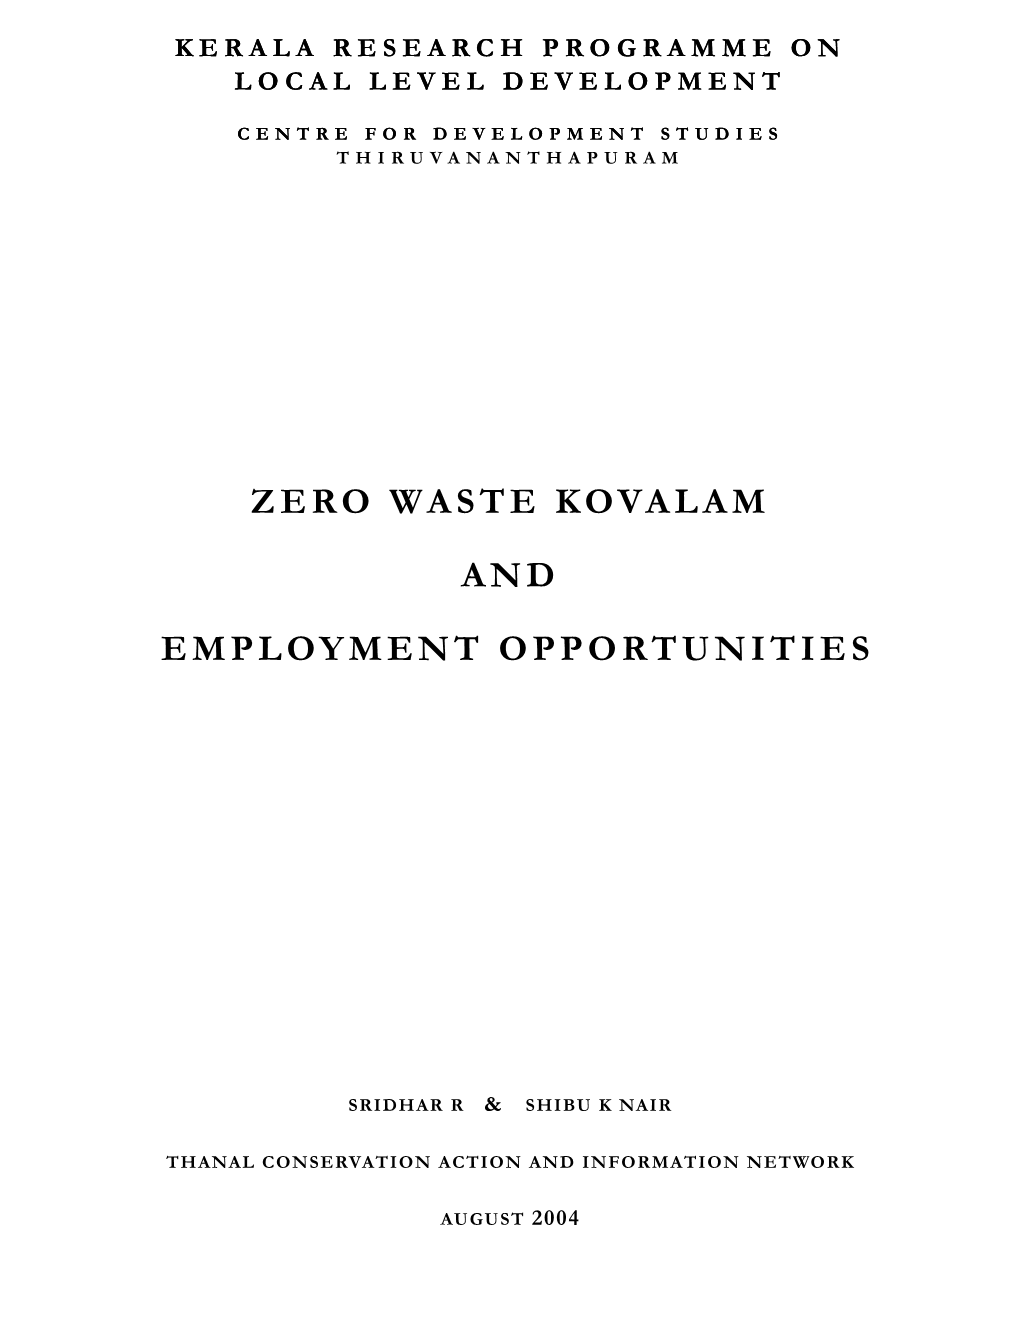 Zero Waste Kovalam and Employment Opportunities